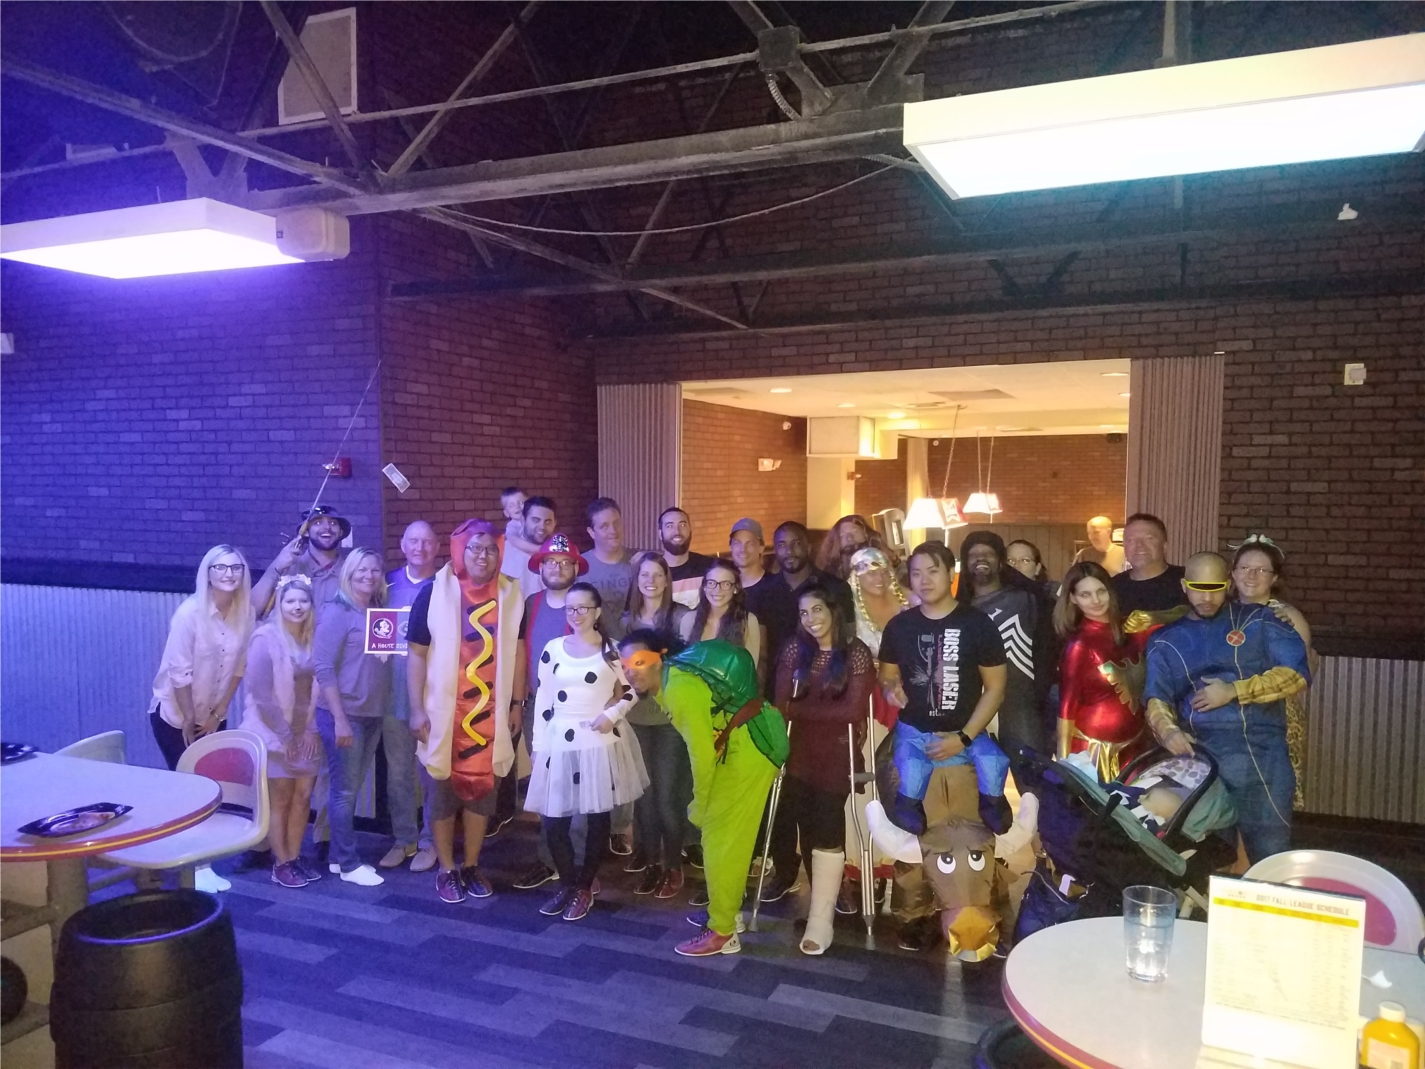 Events are a way we can get together and have some fun outside of the work environment. The Halloween bowling event gave us a reason to dress up and have a great time bowling. 